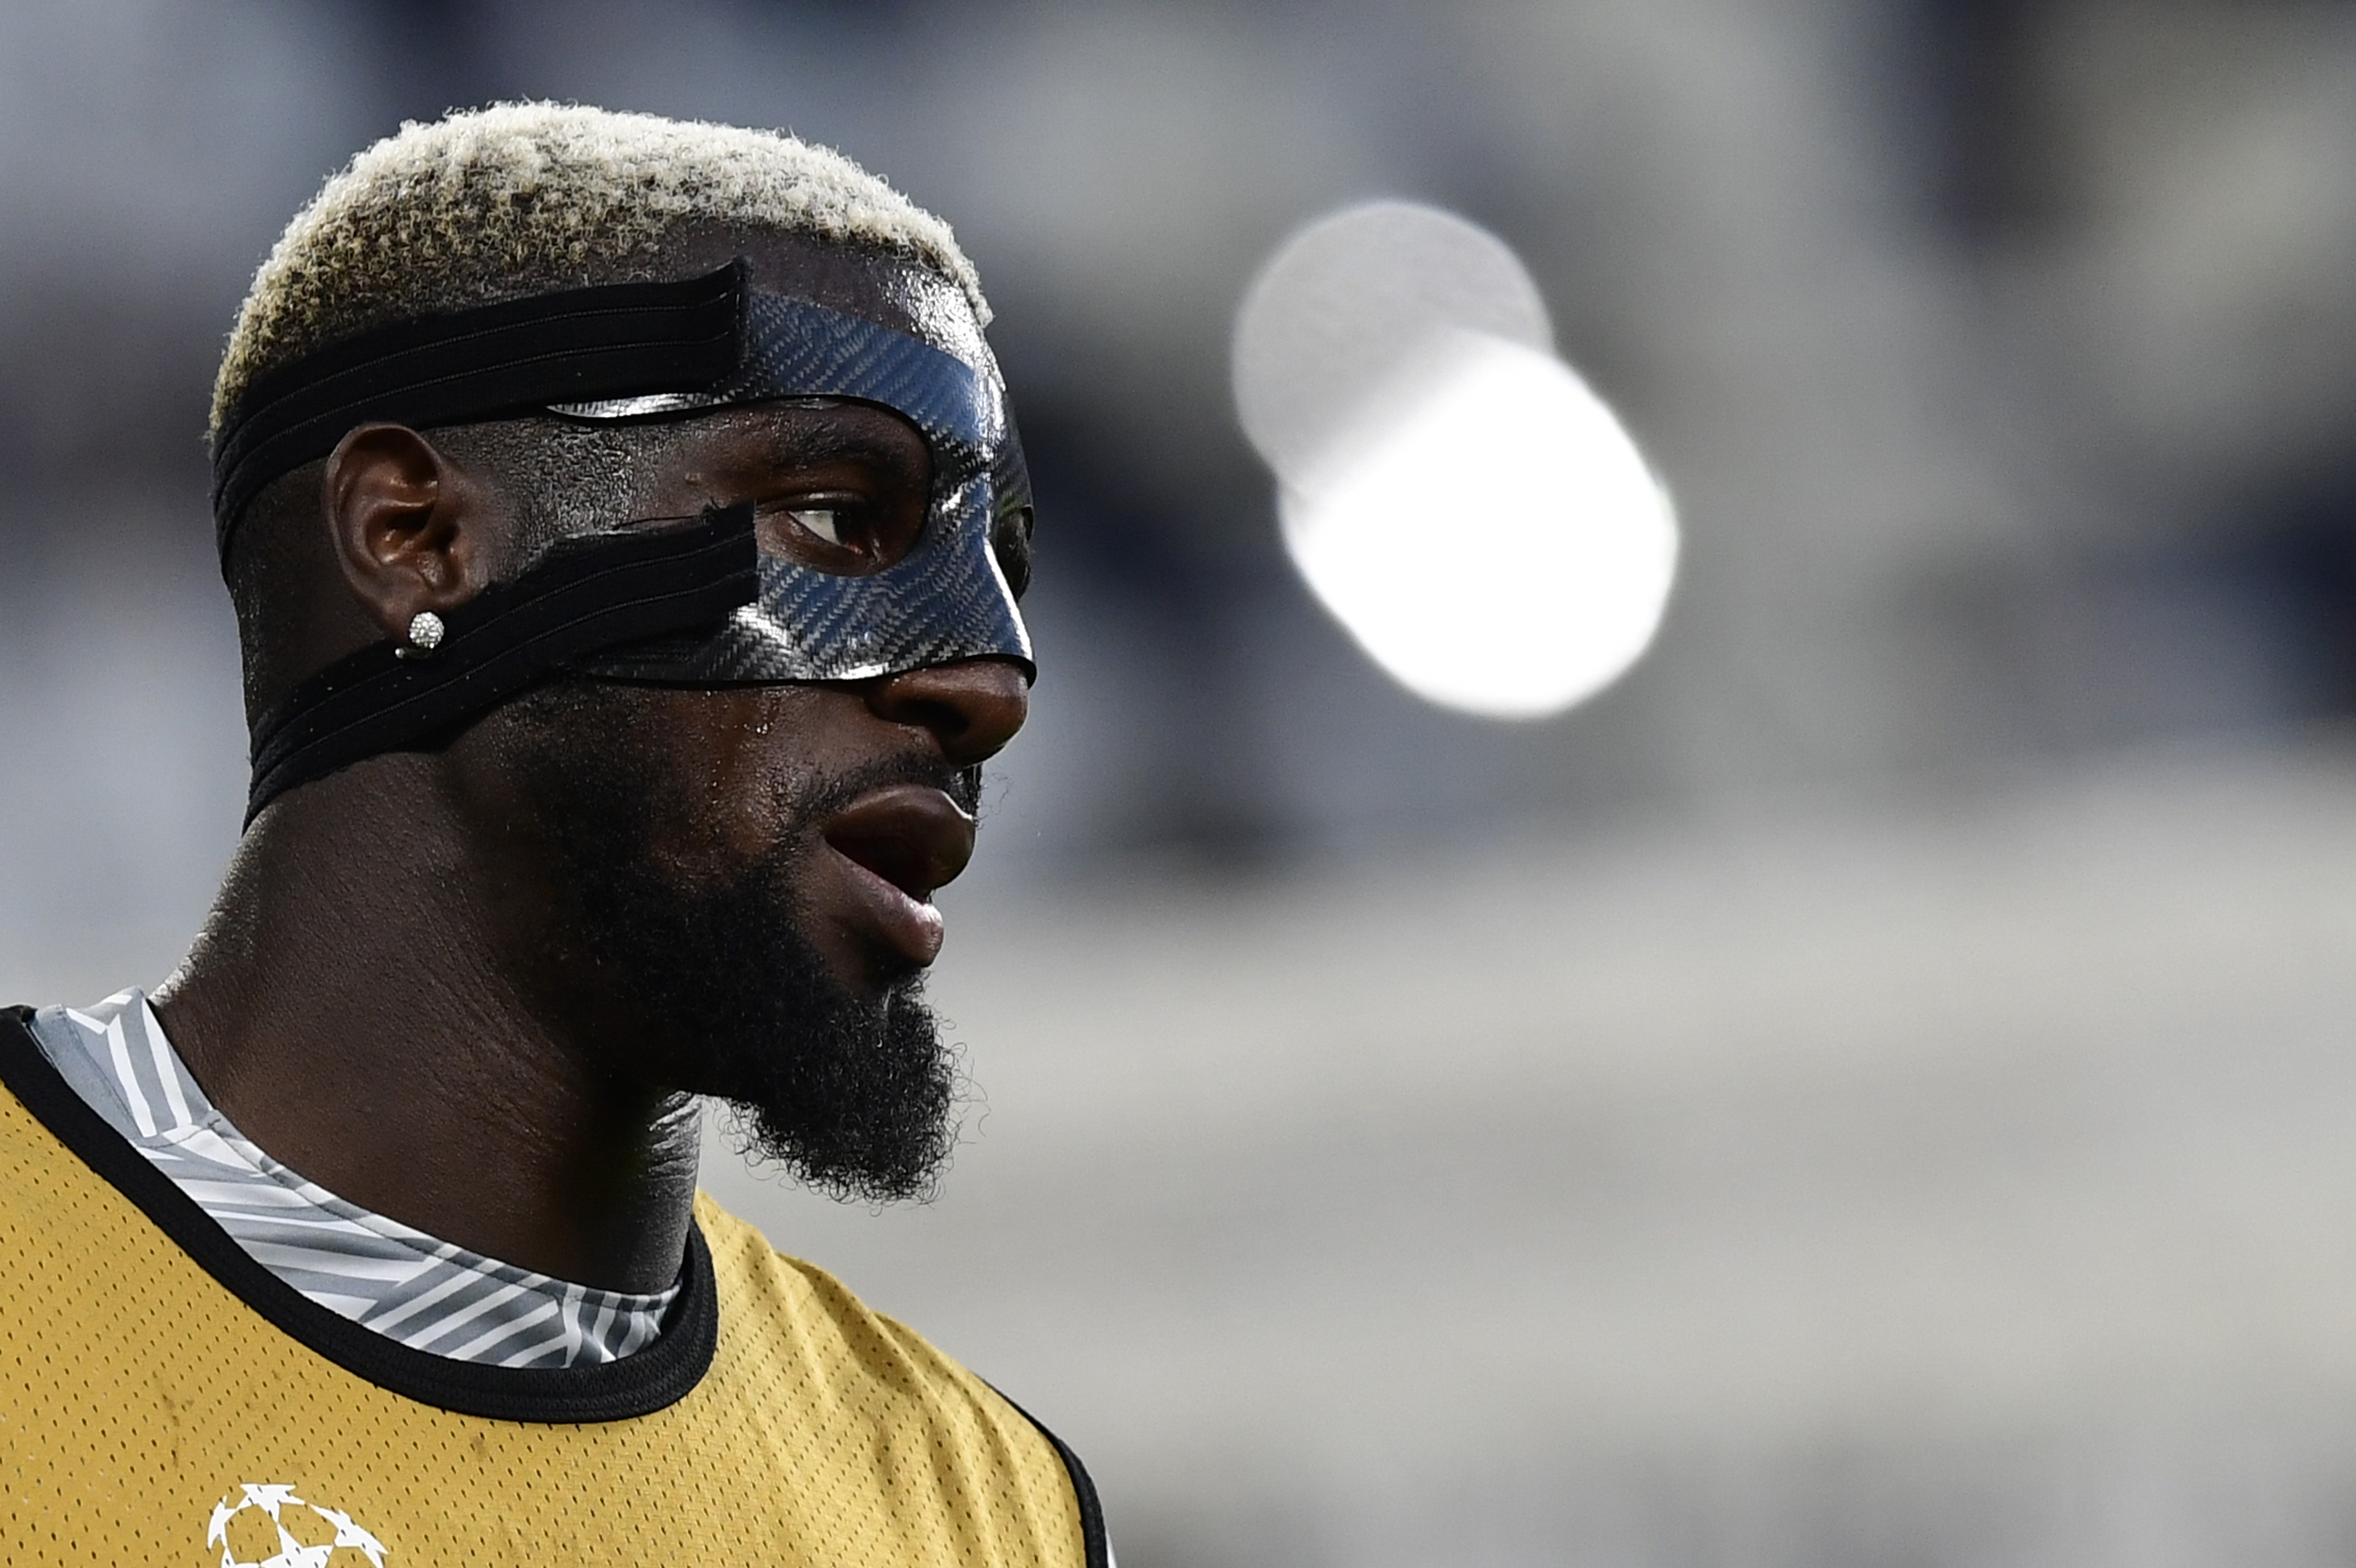 Monaco's French midfielder Tiemoue Bakayoko warms up before the UEFA Champions League semi final second leg football match Juventus vs Monaco, on May 9, 2017 at the Juventus stadium in Turin.  / AFP PHOTO / Miguel MEDINA        (Photo credit should read MIGUEL MEDINA/AFP/Getty Images)